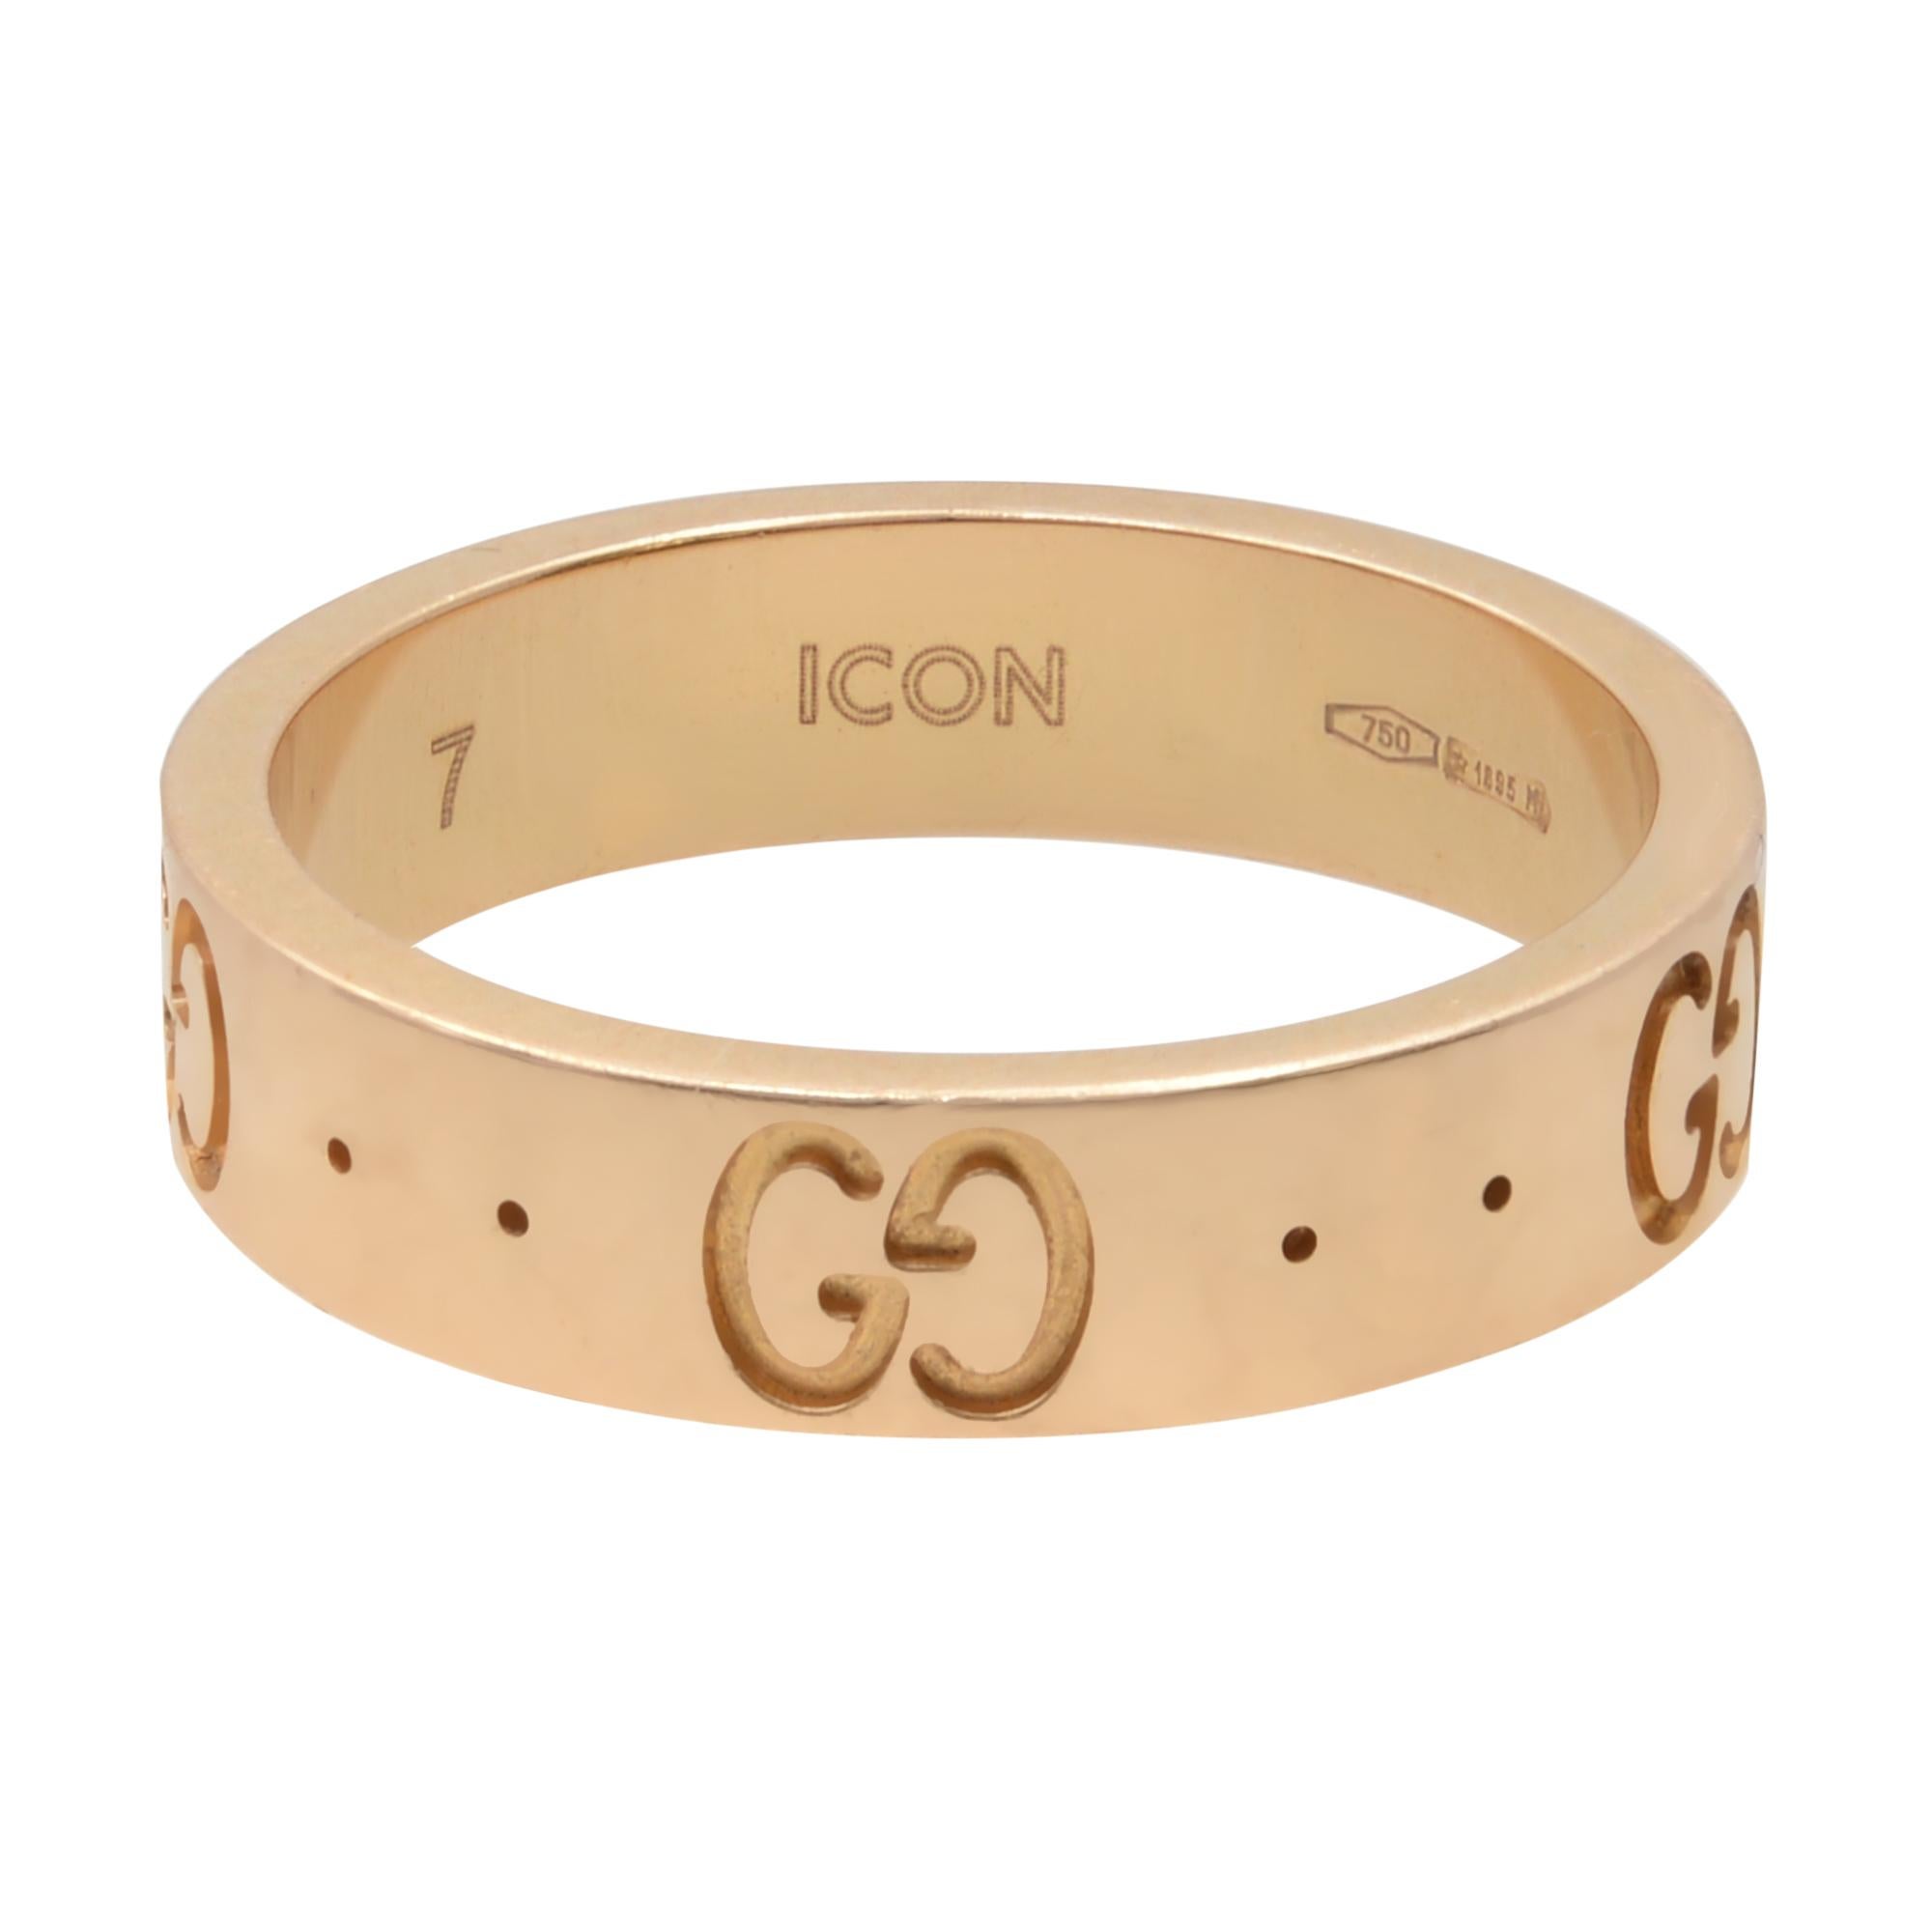 This Gucci Icon ring is crafted from 18k rose gold with engraved Gucci GG logo. Ring size 4. Width: 4mm. Look cool as a pinky ring. Great pre-owned condition. Comes with a Gucci box. 